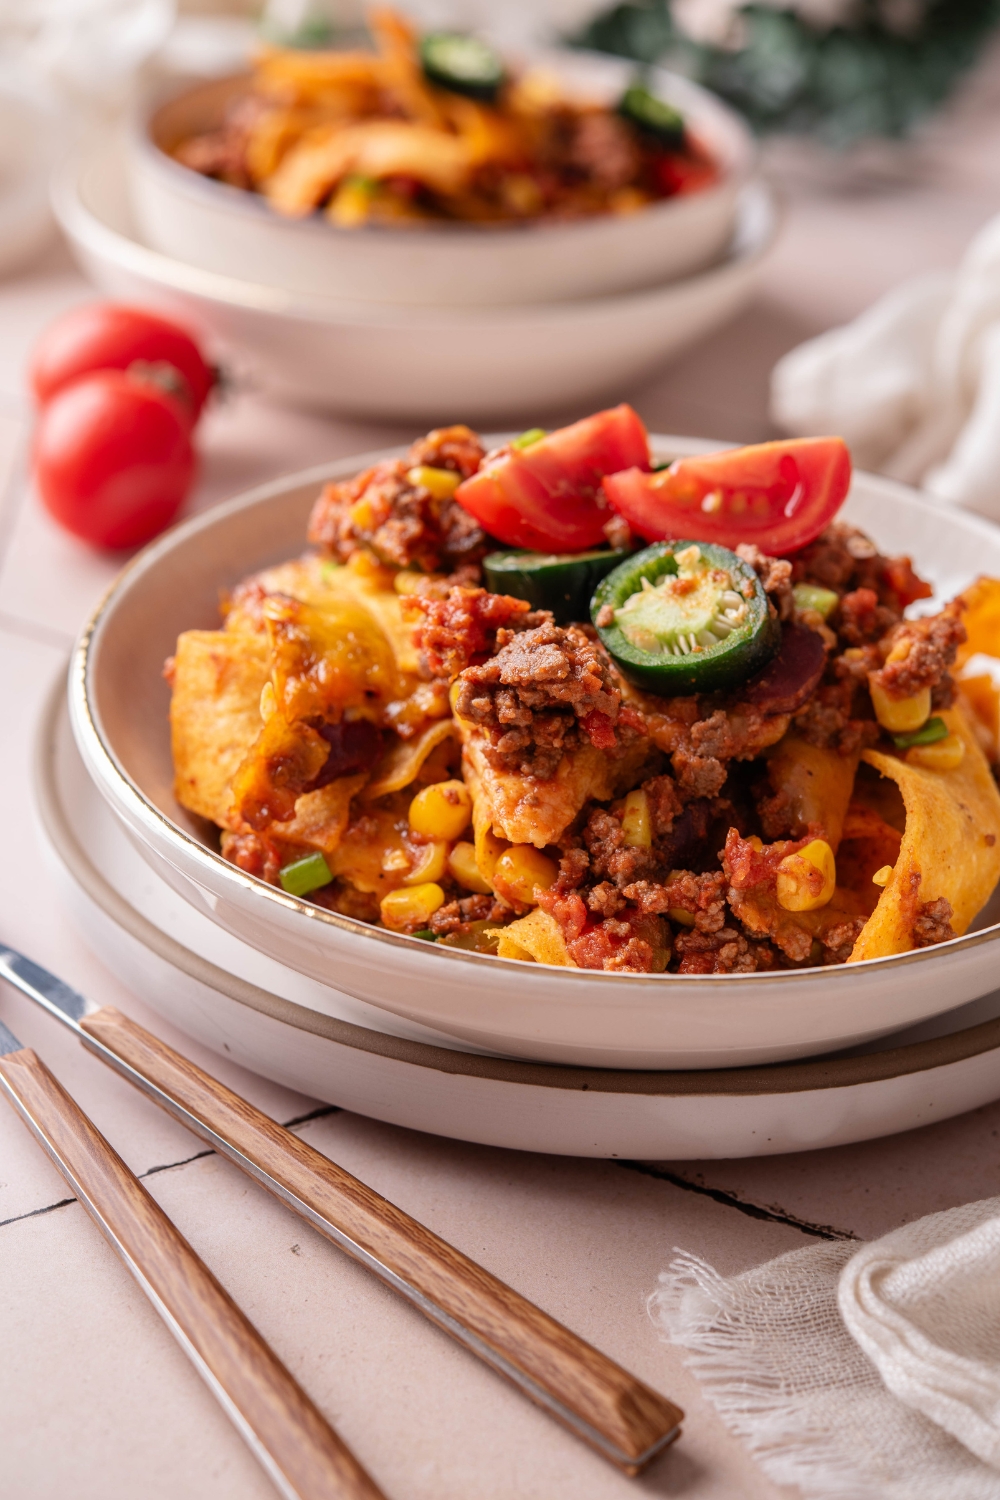 A bowl of Frito taco casserole topped with melted cheese, diced tomatoes, and sliced jalapeños.